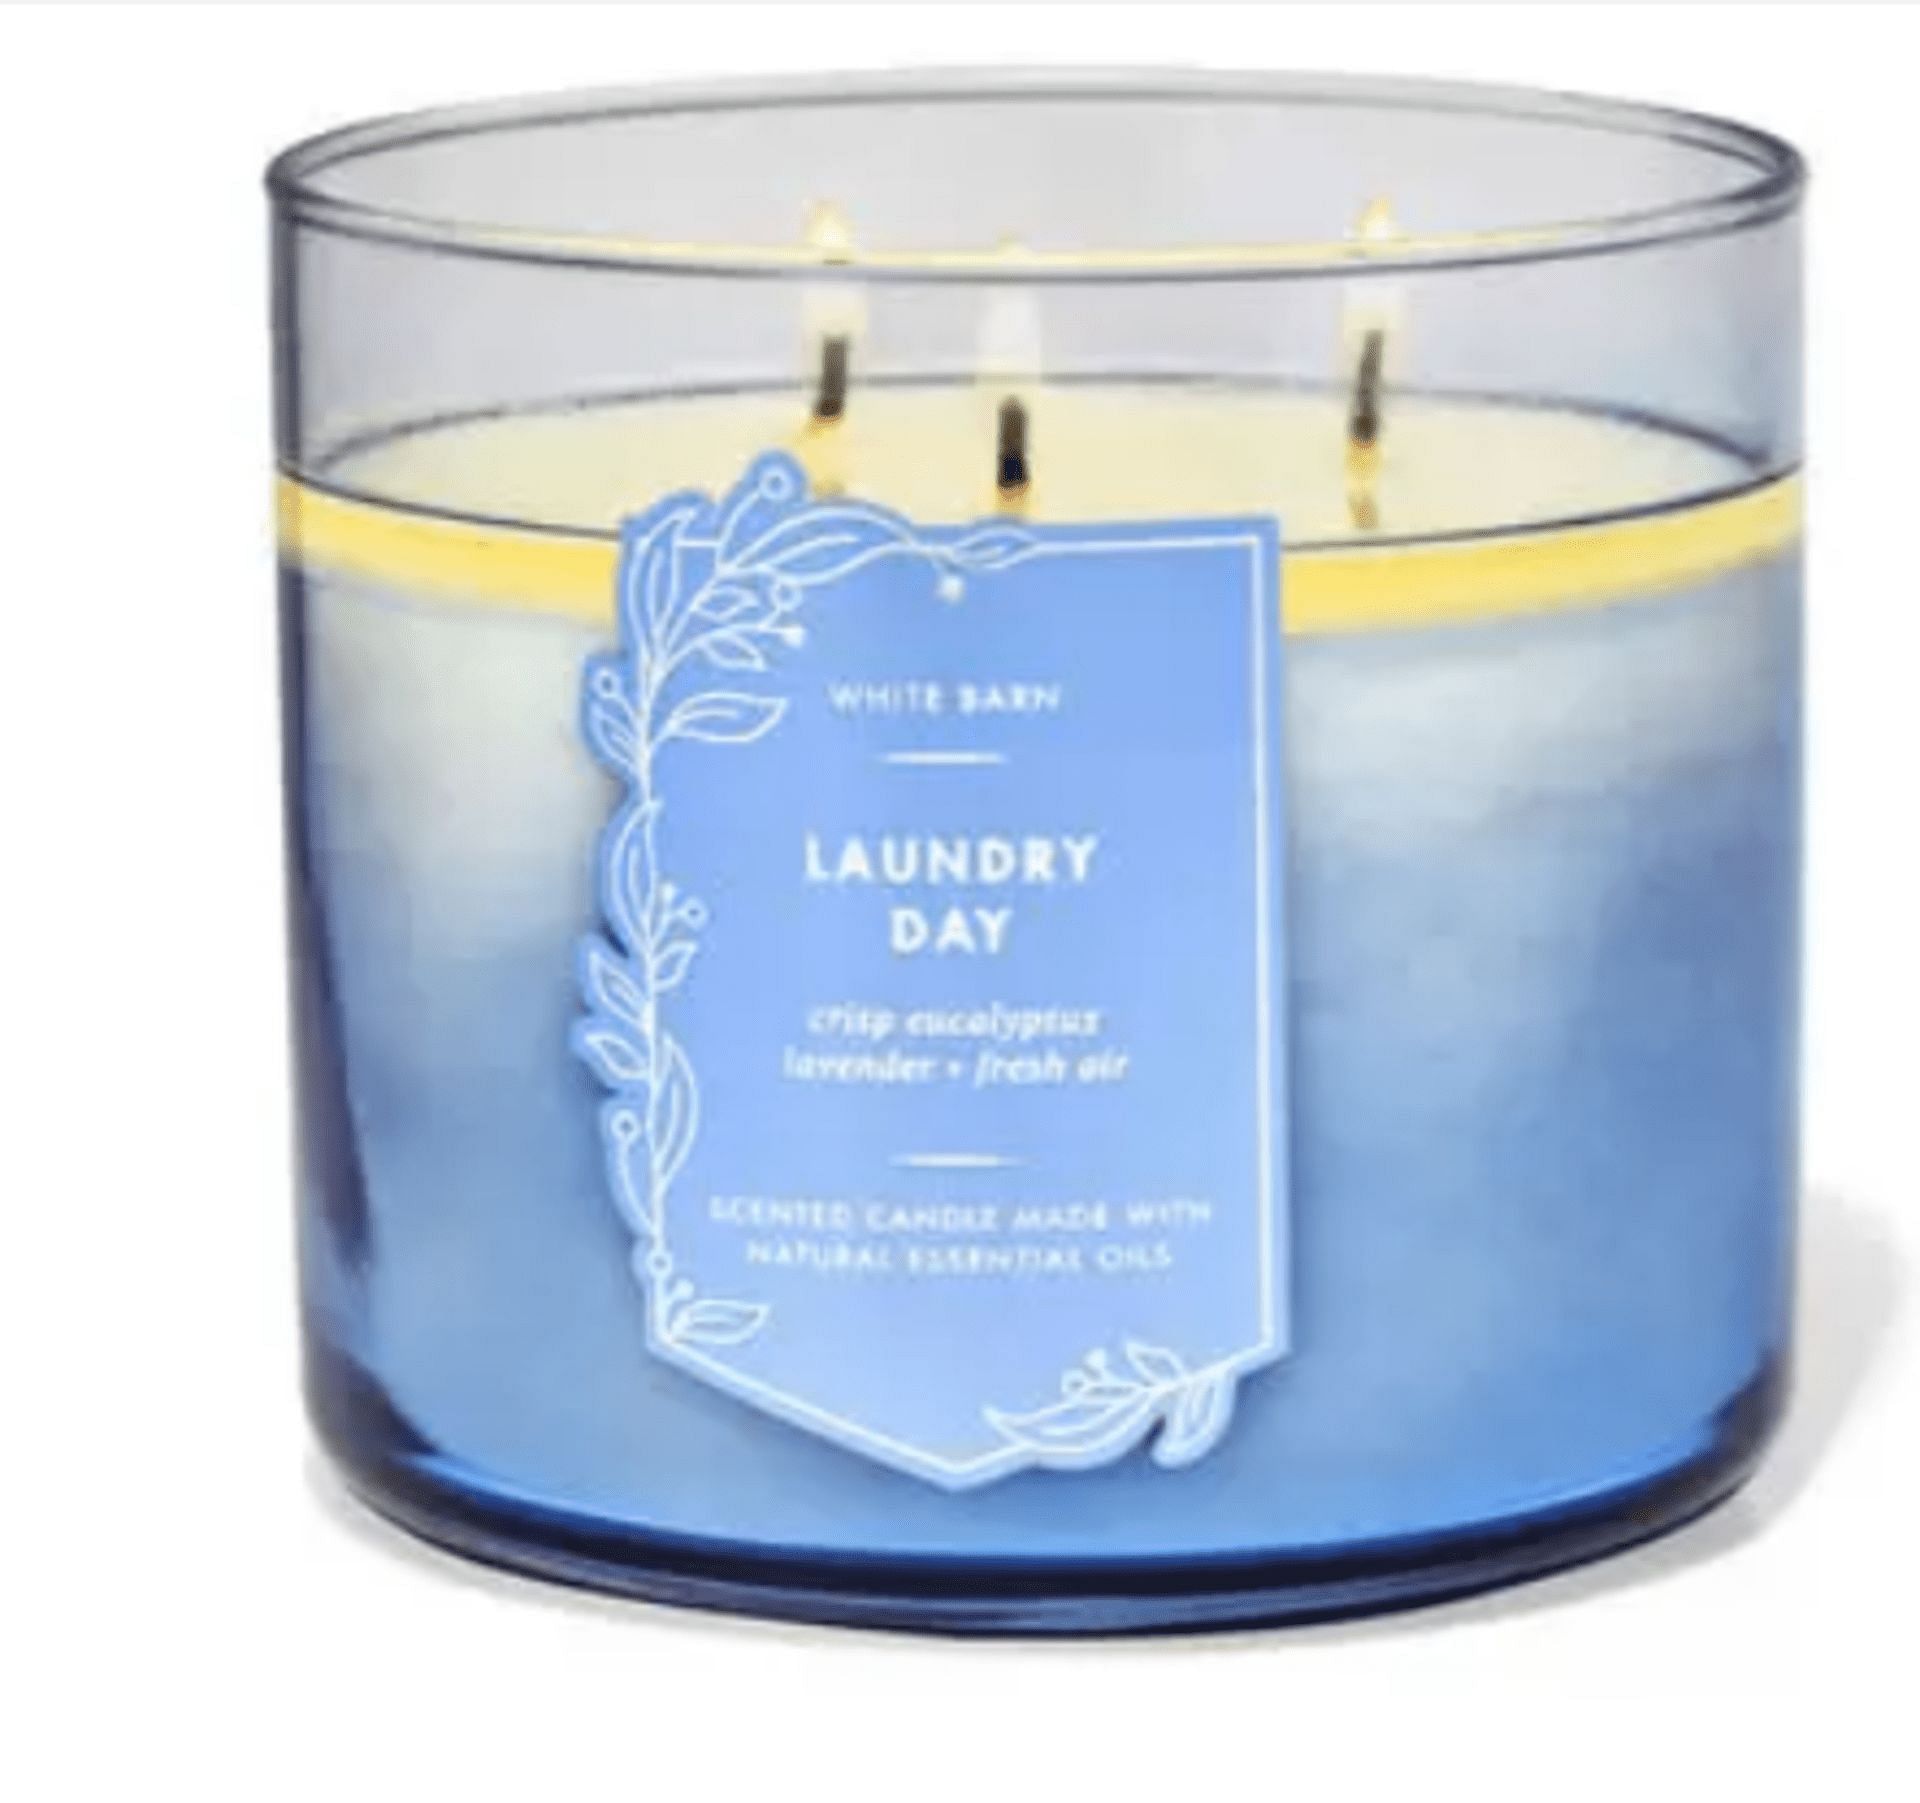 Laundry Day Scent (Image via Bath and Body Works)